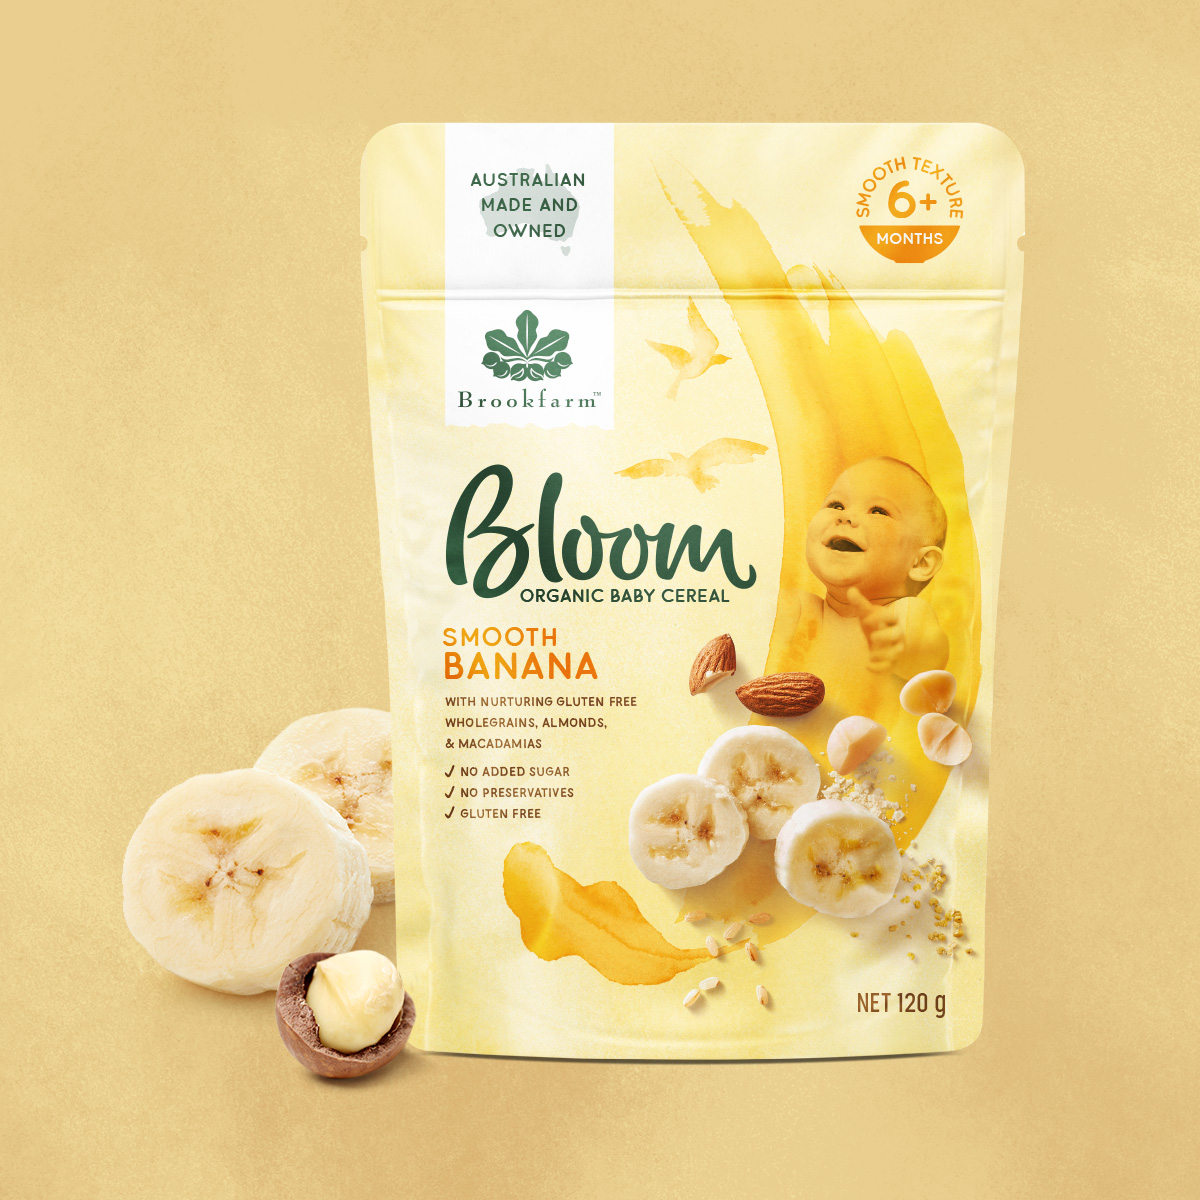 banana-infant-cereal-formula-newtown-agency-boxer-packaging